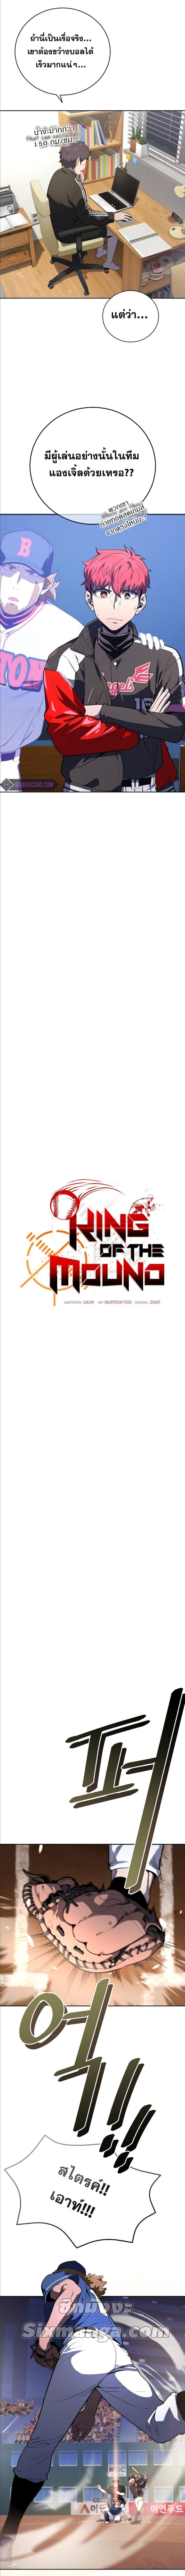 King of the Mound 29 (3)